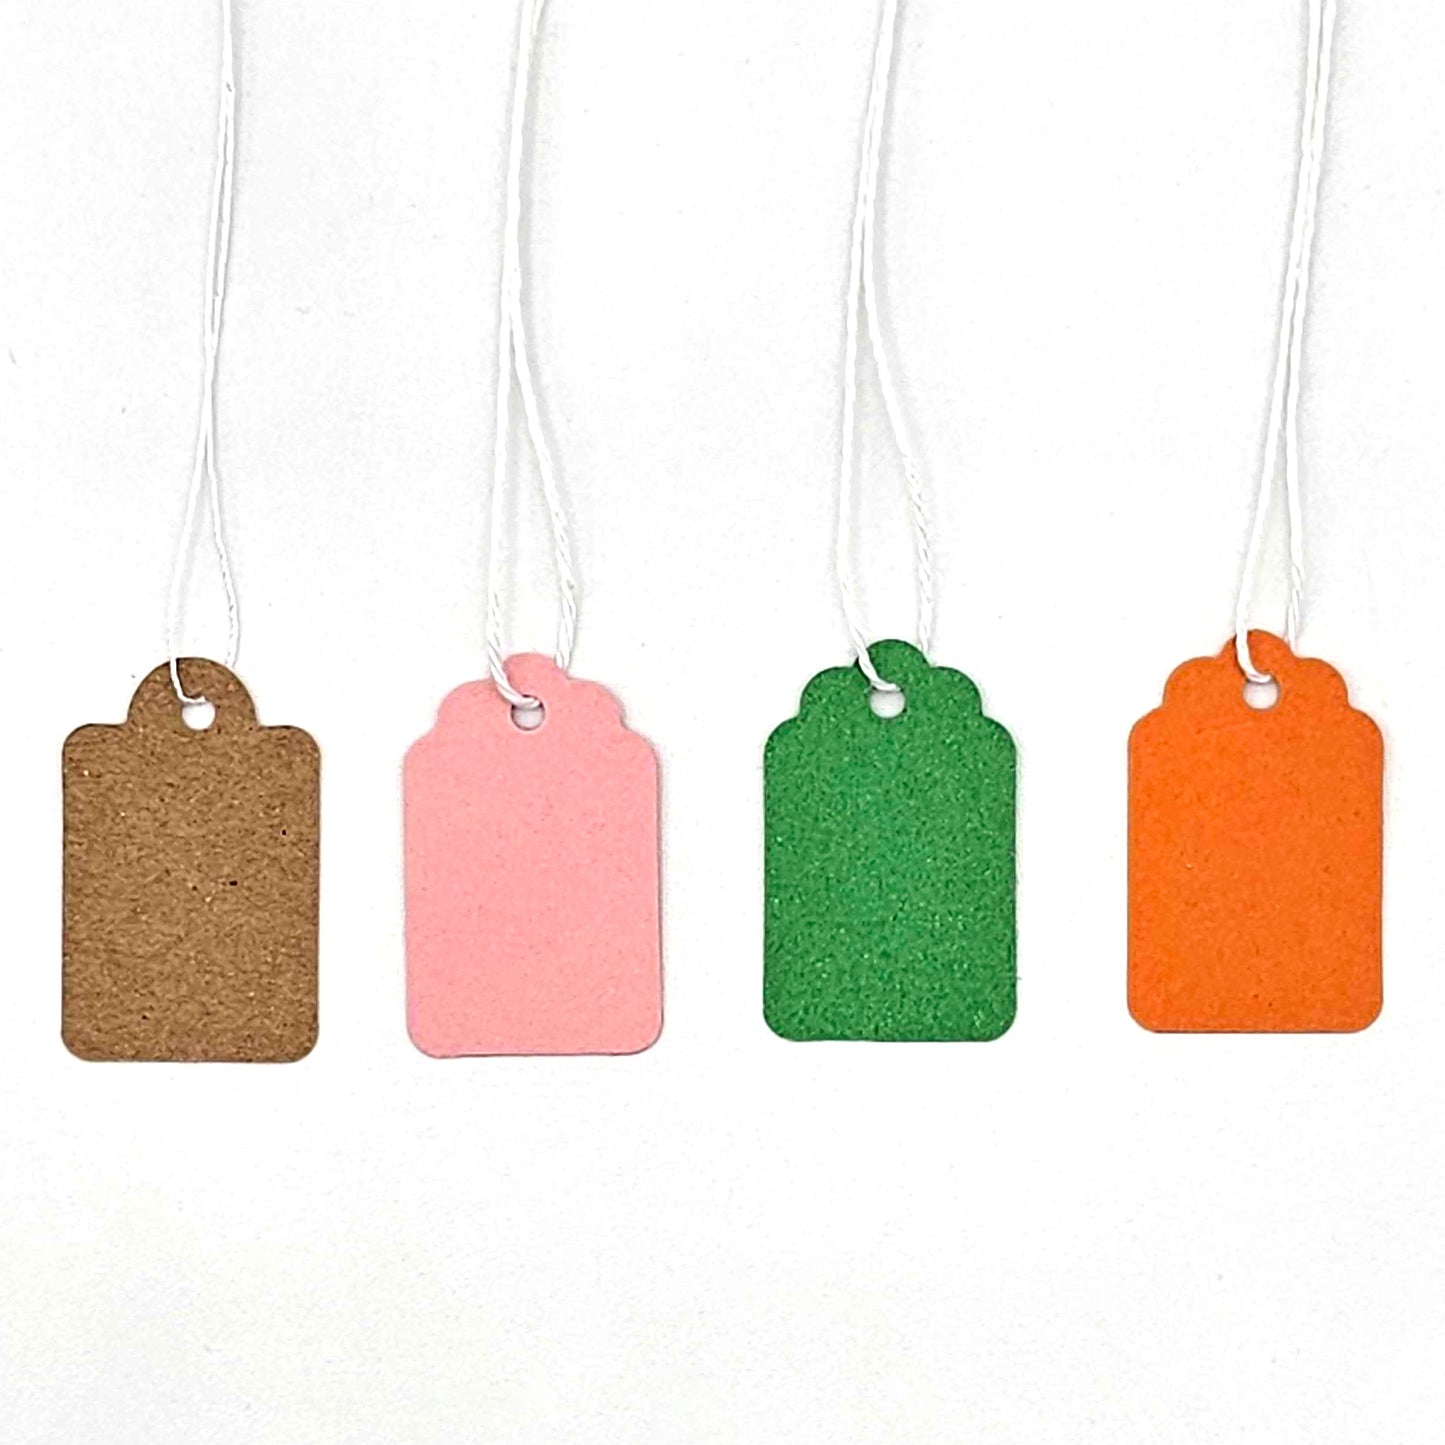 15 x 25mm Kraft Paper Knotted String Price Tags